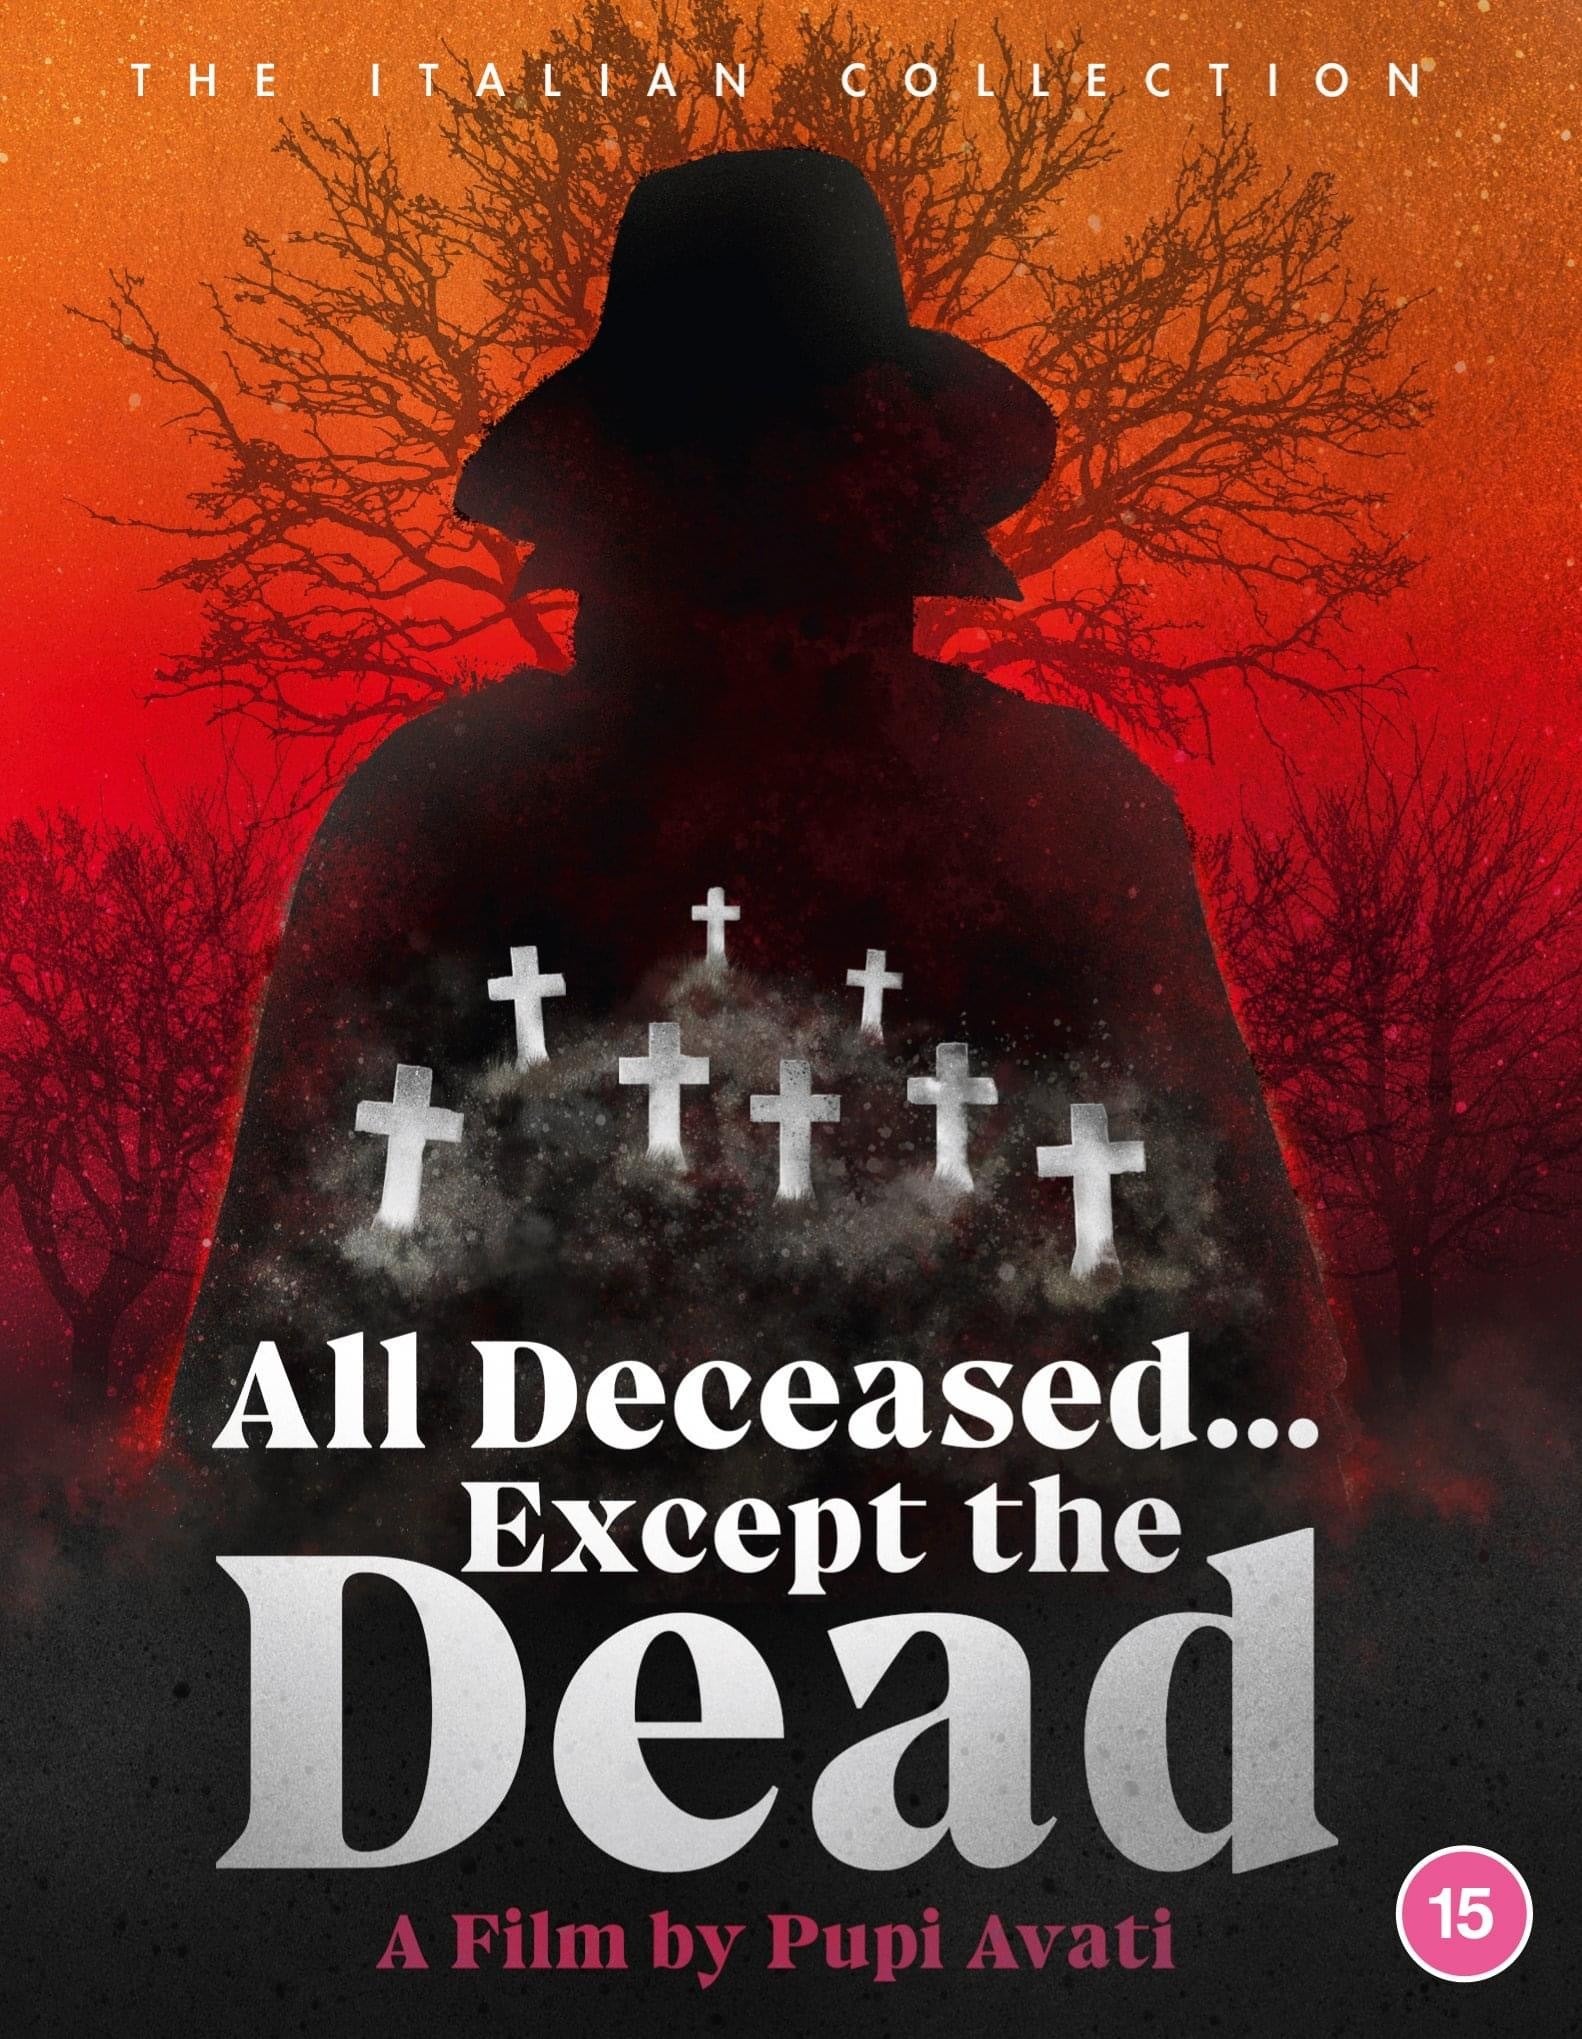 ALL DECEASED EXCEPT THE DEAD (REGION FREE IMPORT) BLU-RAY